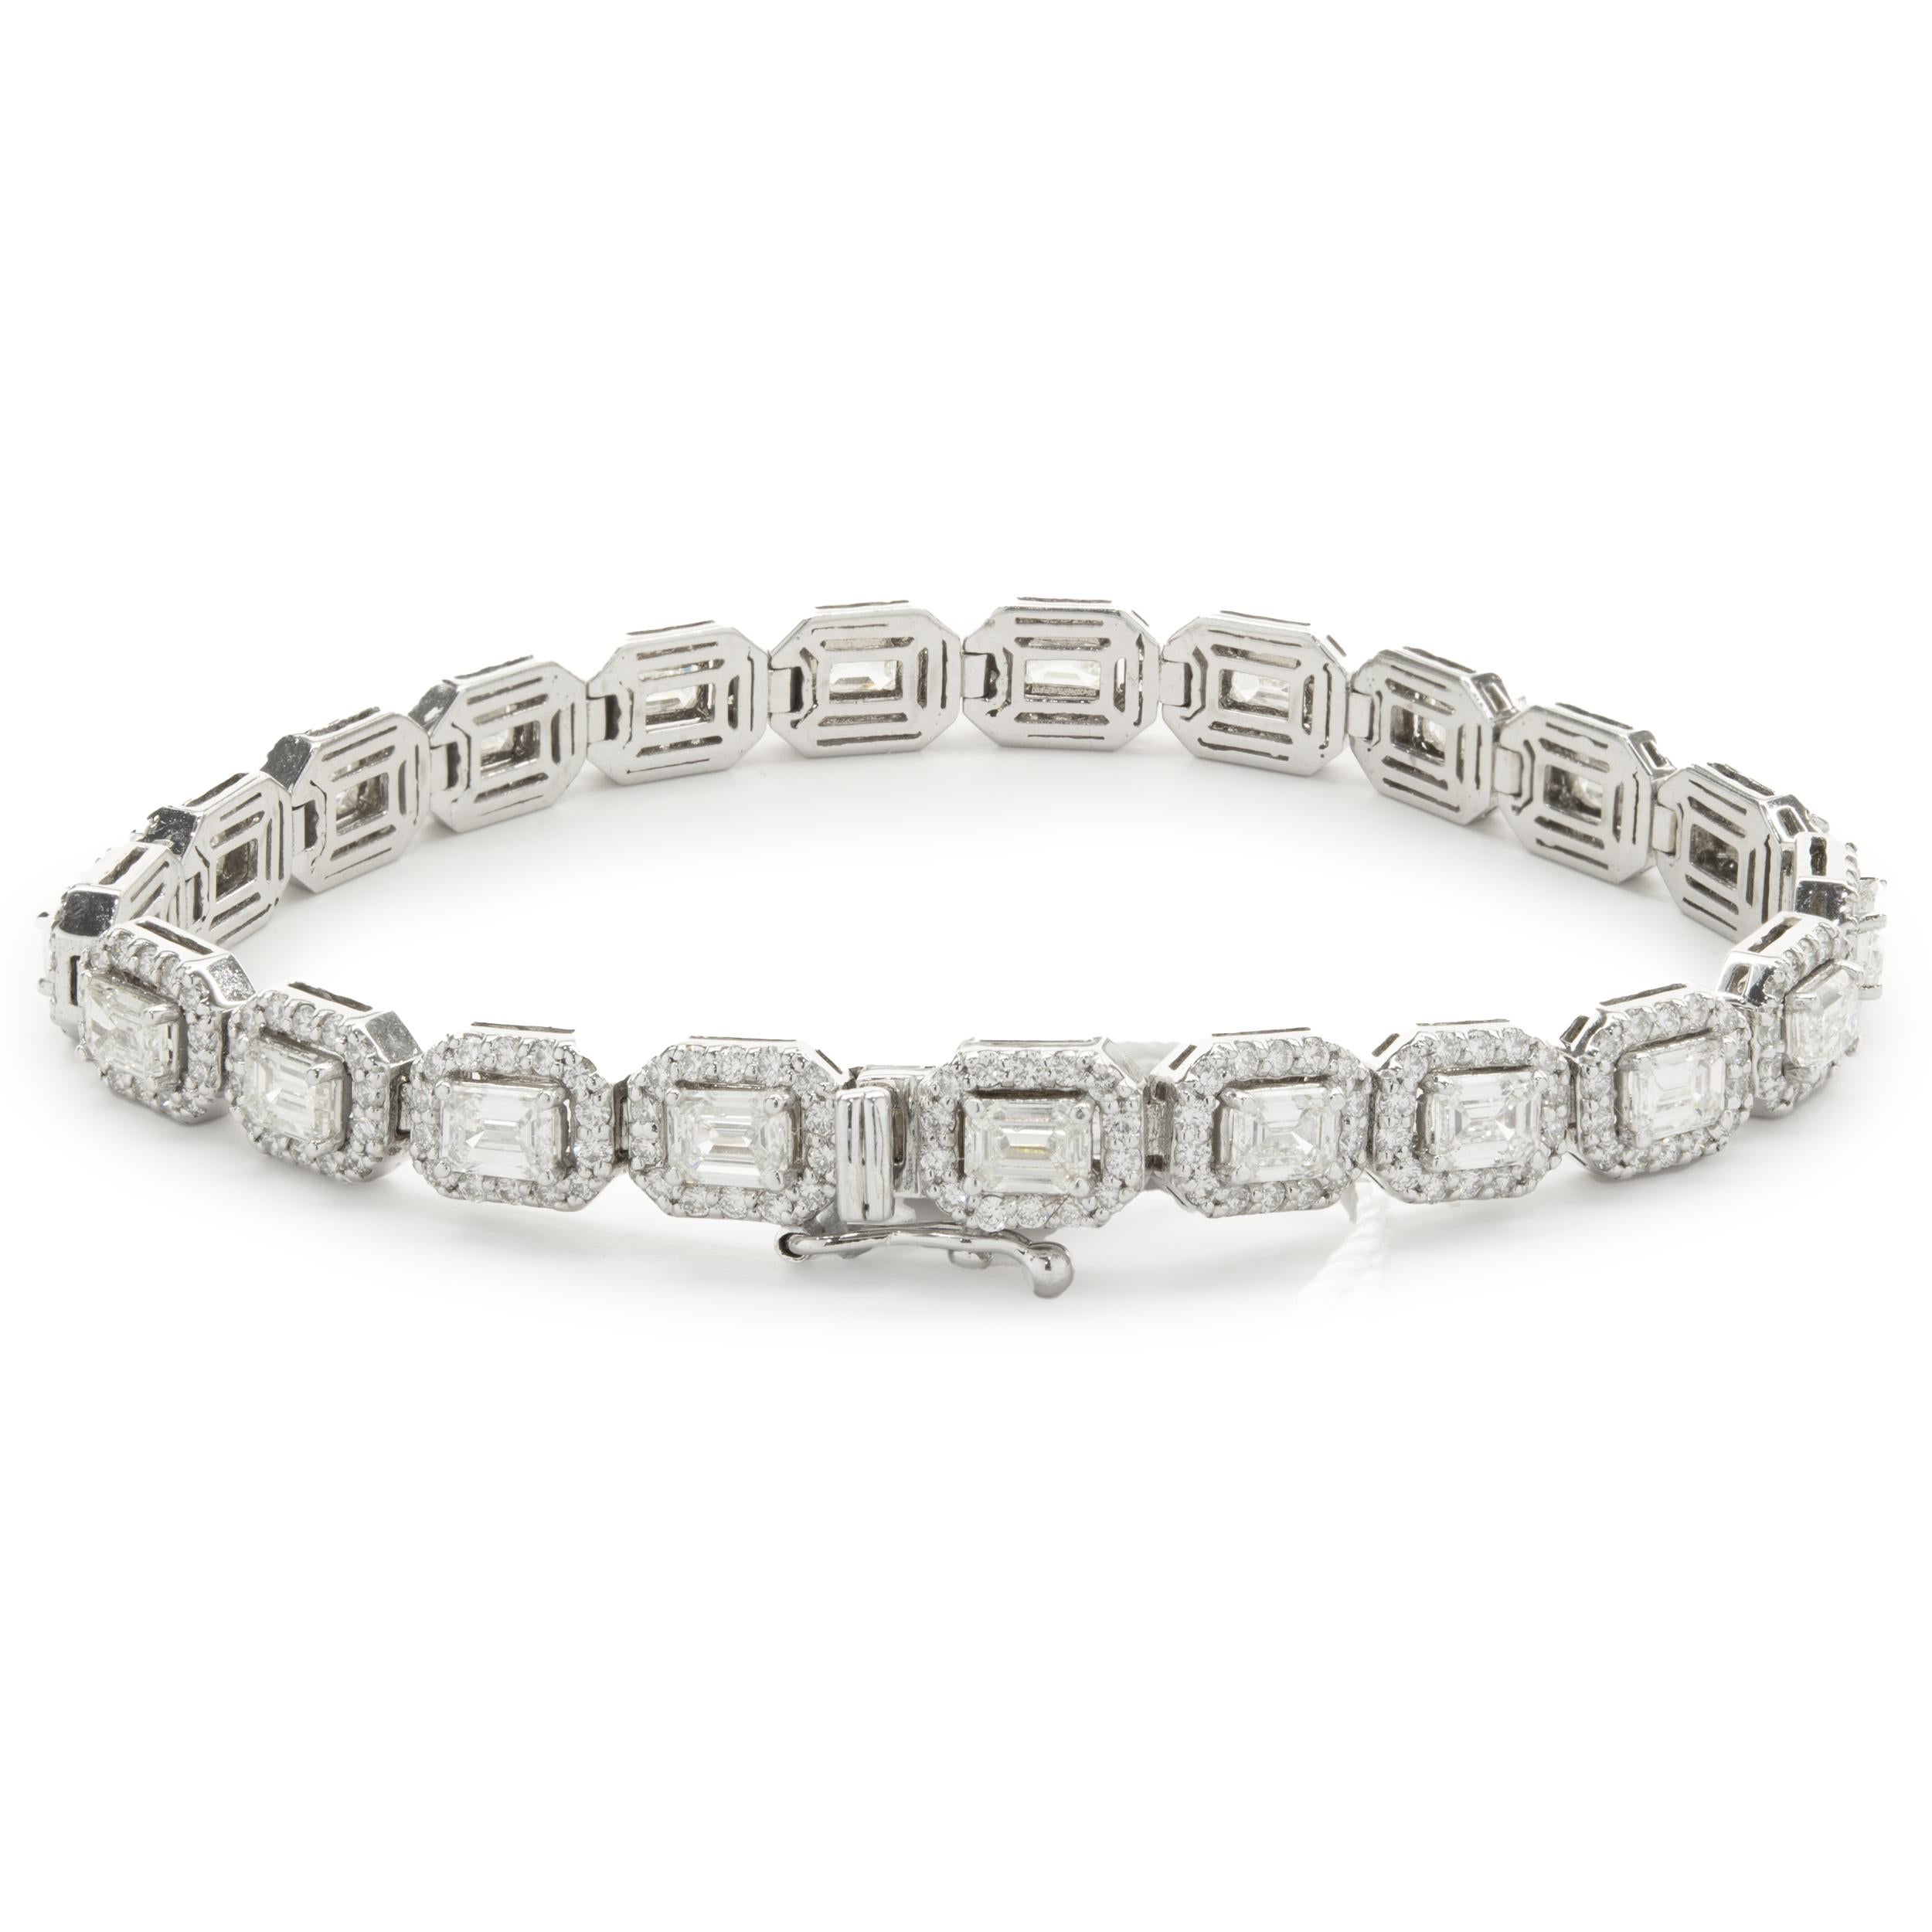 14 Karat White Gold Emerald Cut and Diamond Halo Tennis Bracelet In Excellent Condition For Sale In Scottsdale, AZ